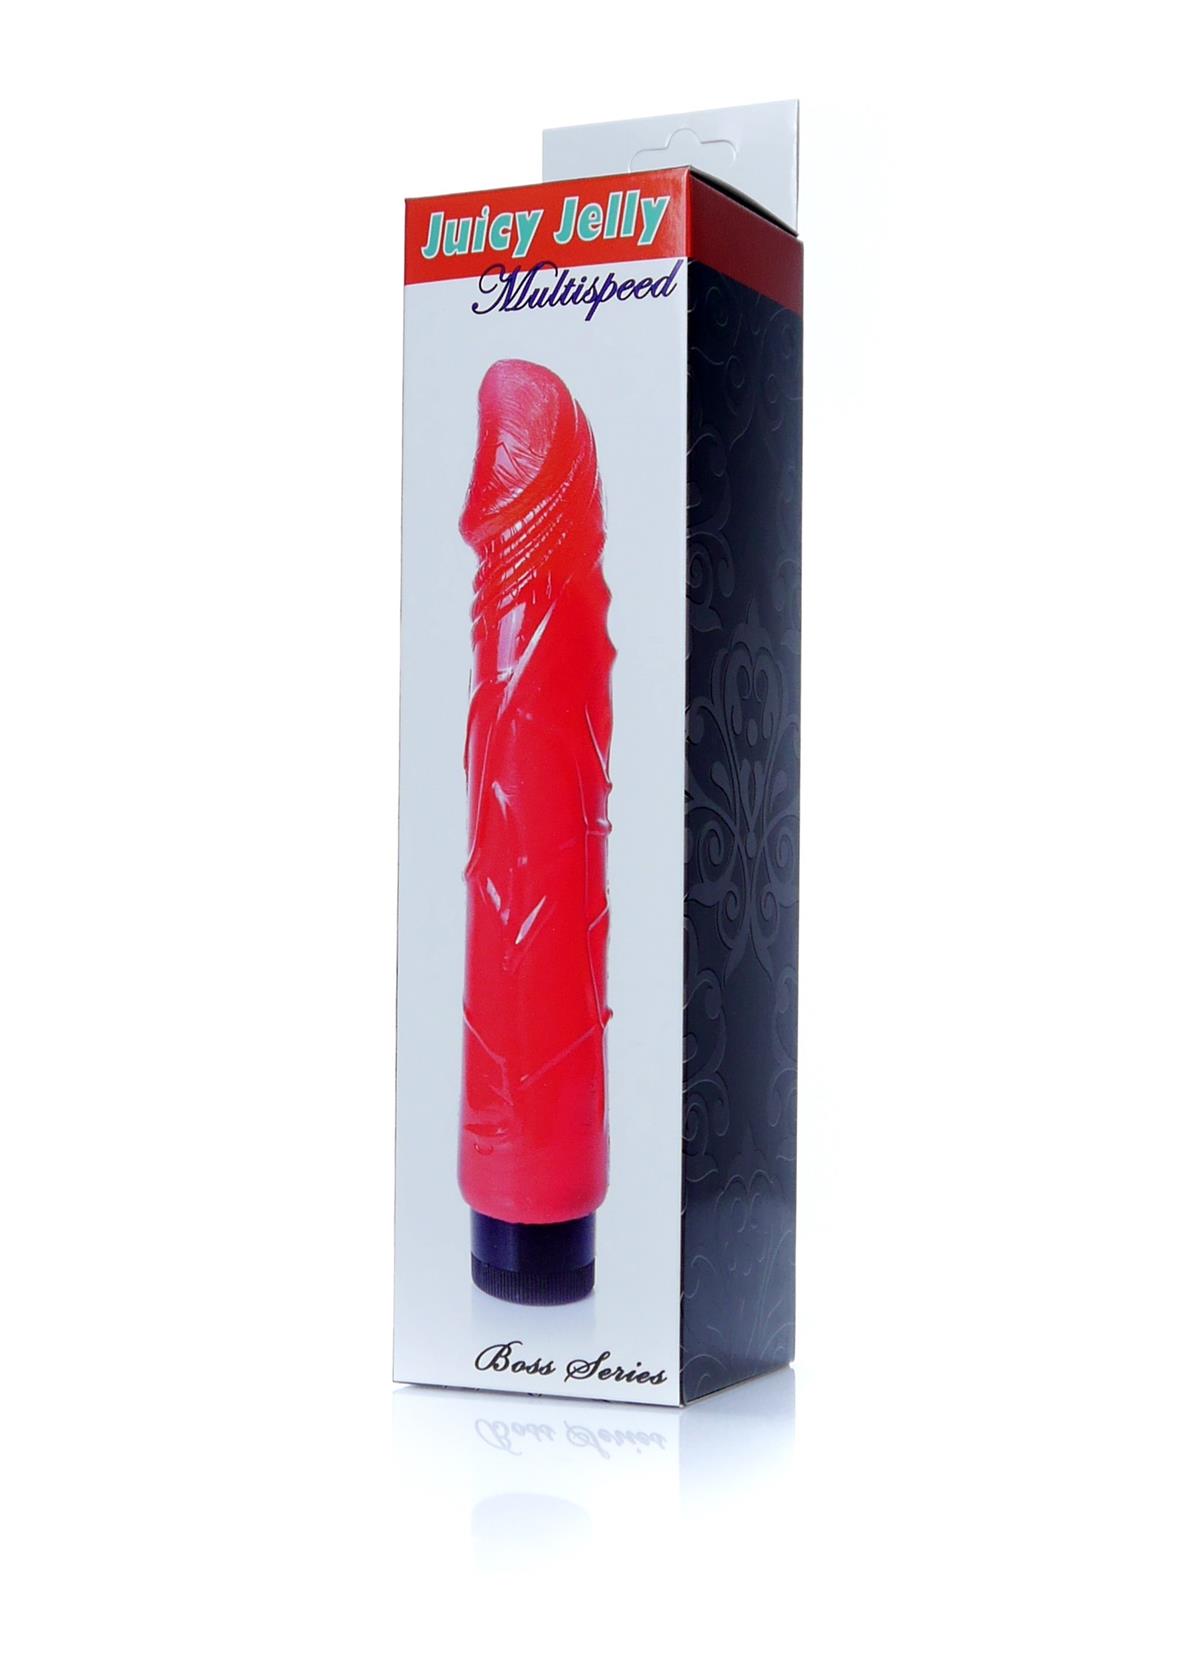 Bossoftoys - 67-00075 - Real Skin - Realistic vibrator - Juicy jelly Red - 22 m- Dia 4 cm - Multispeed